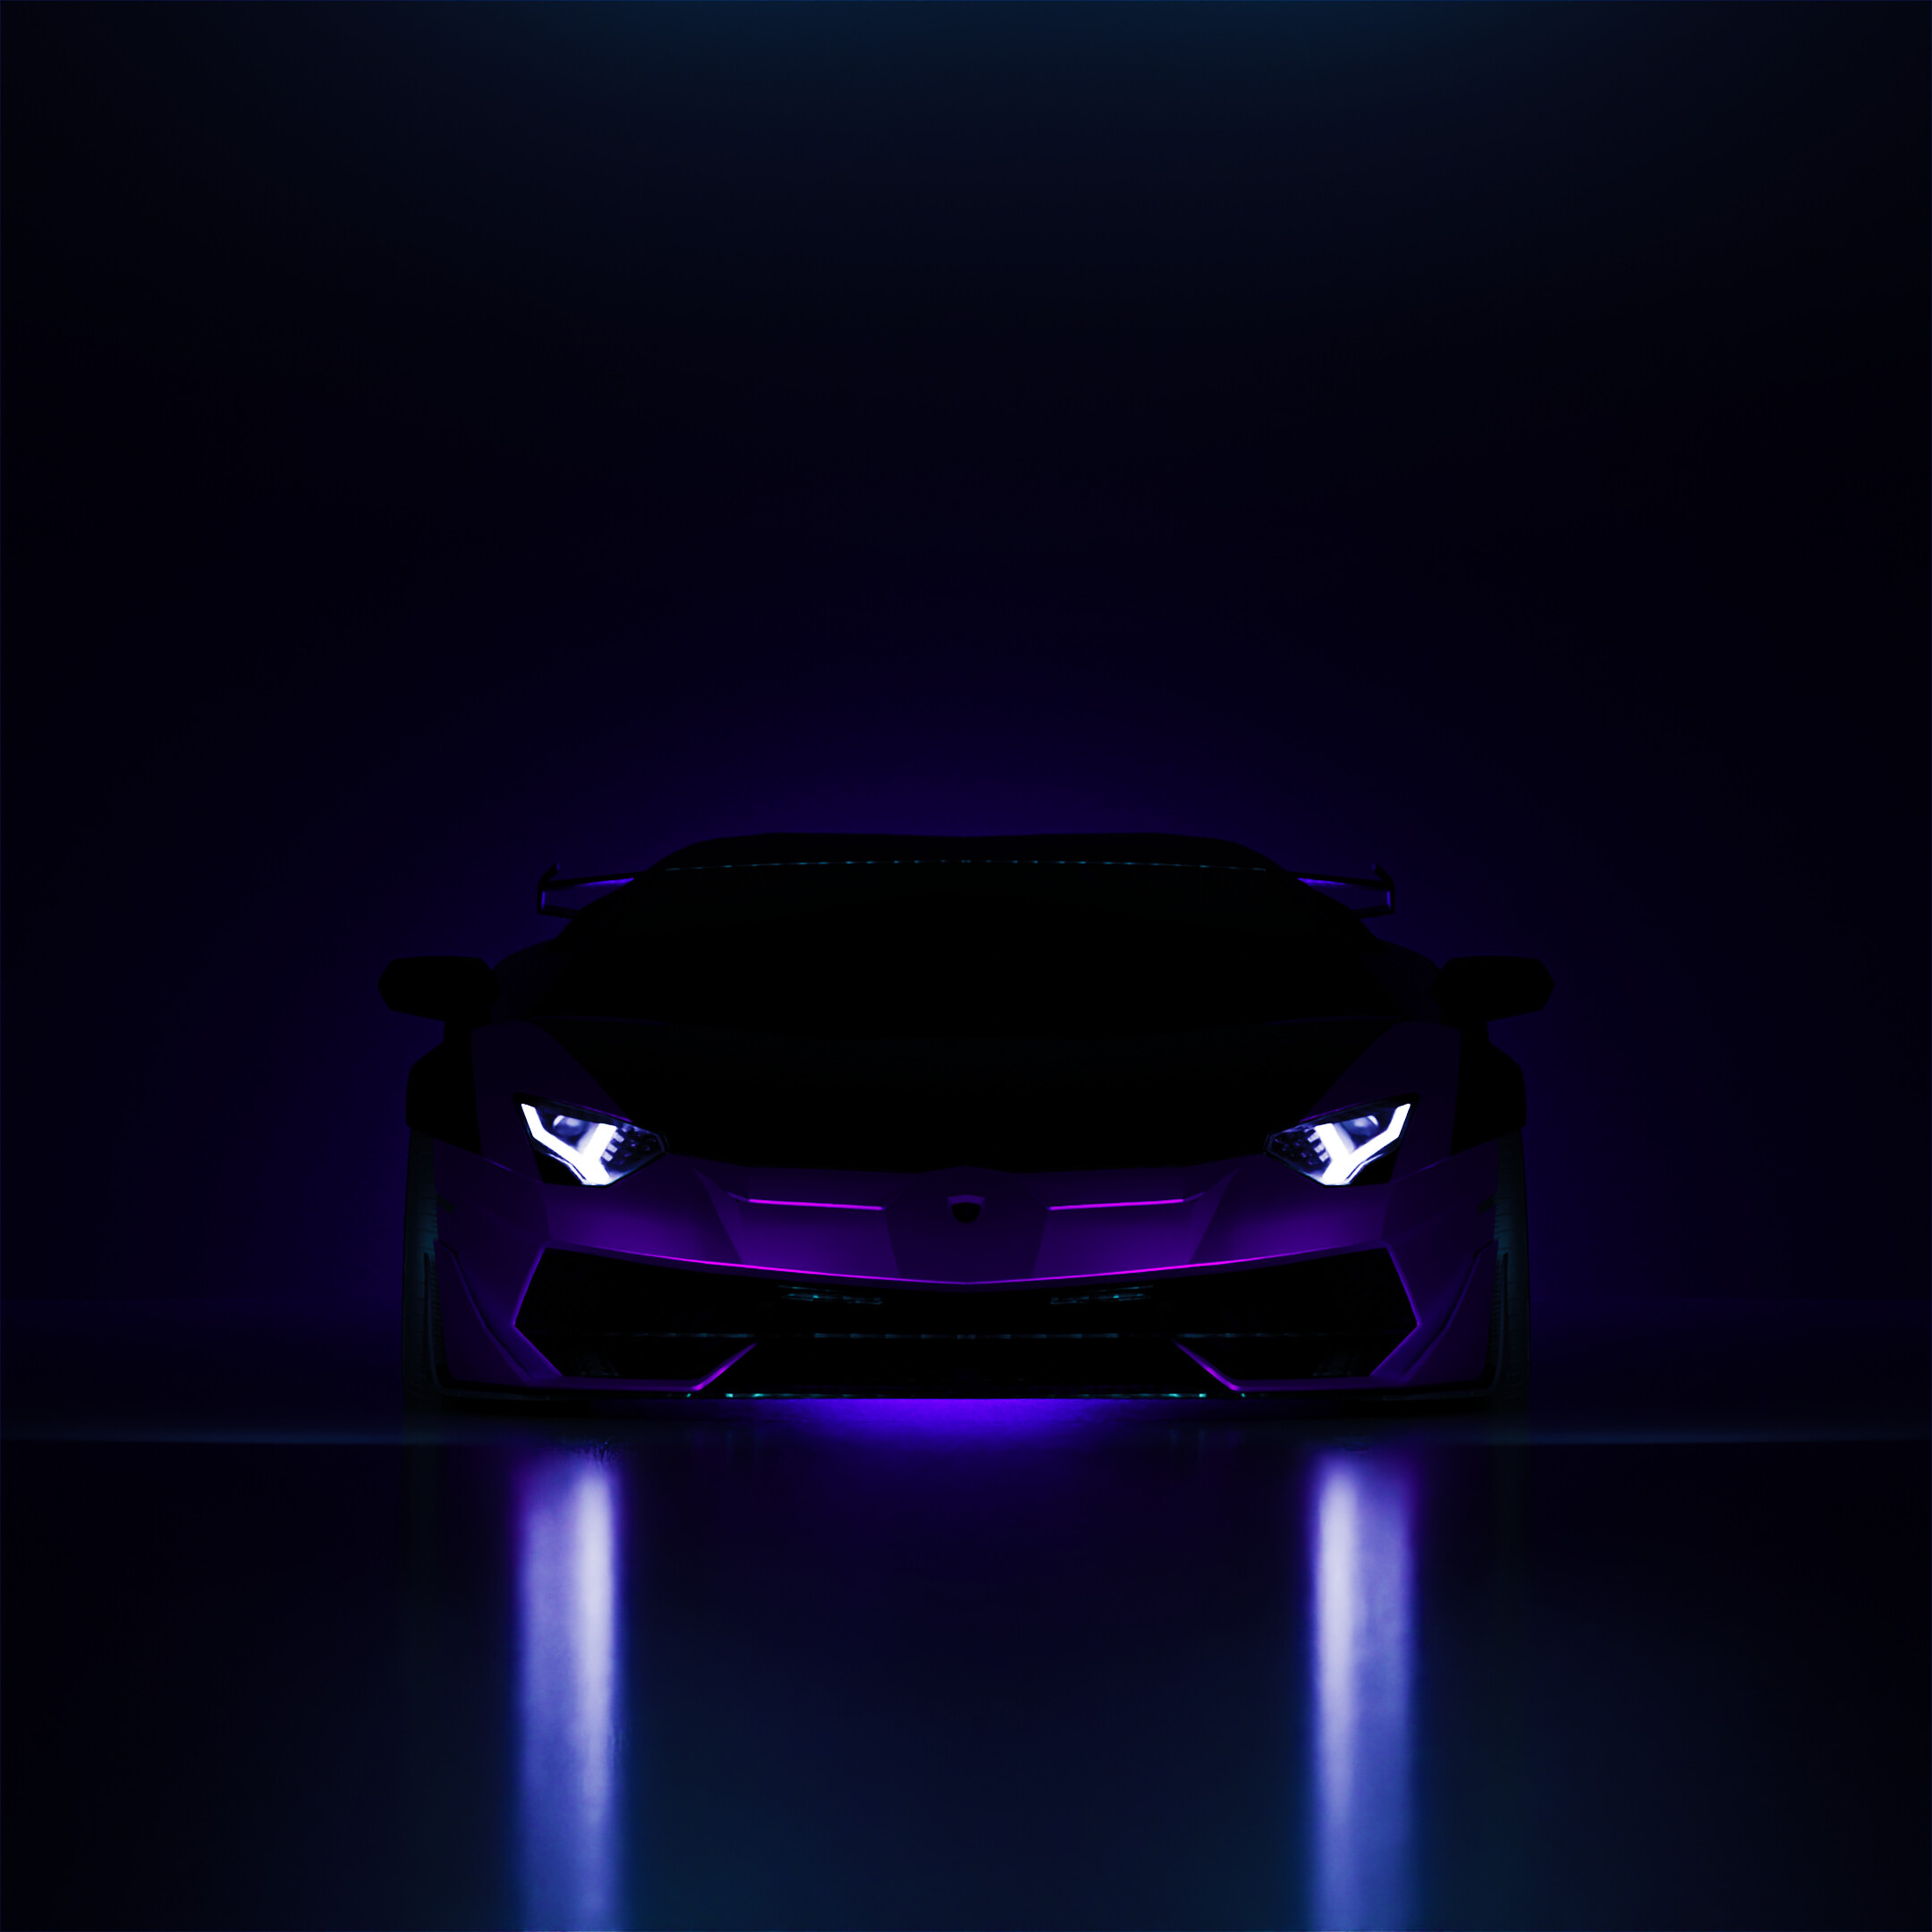 Purple Lamborghini with Hot Lighting - Finished Projects - Blender Artists  Community